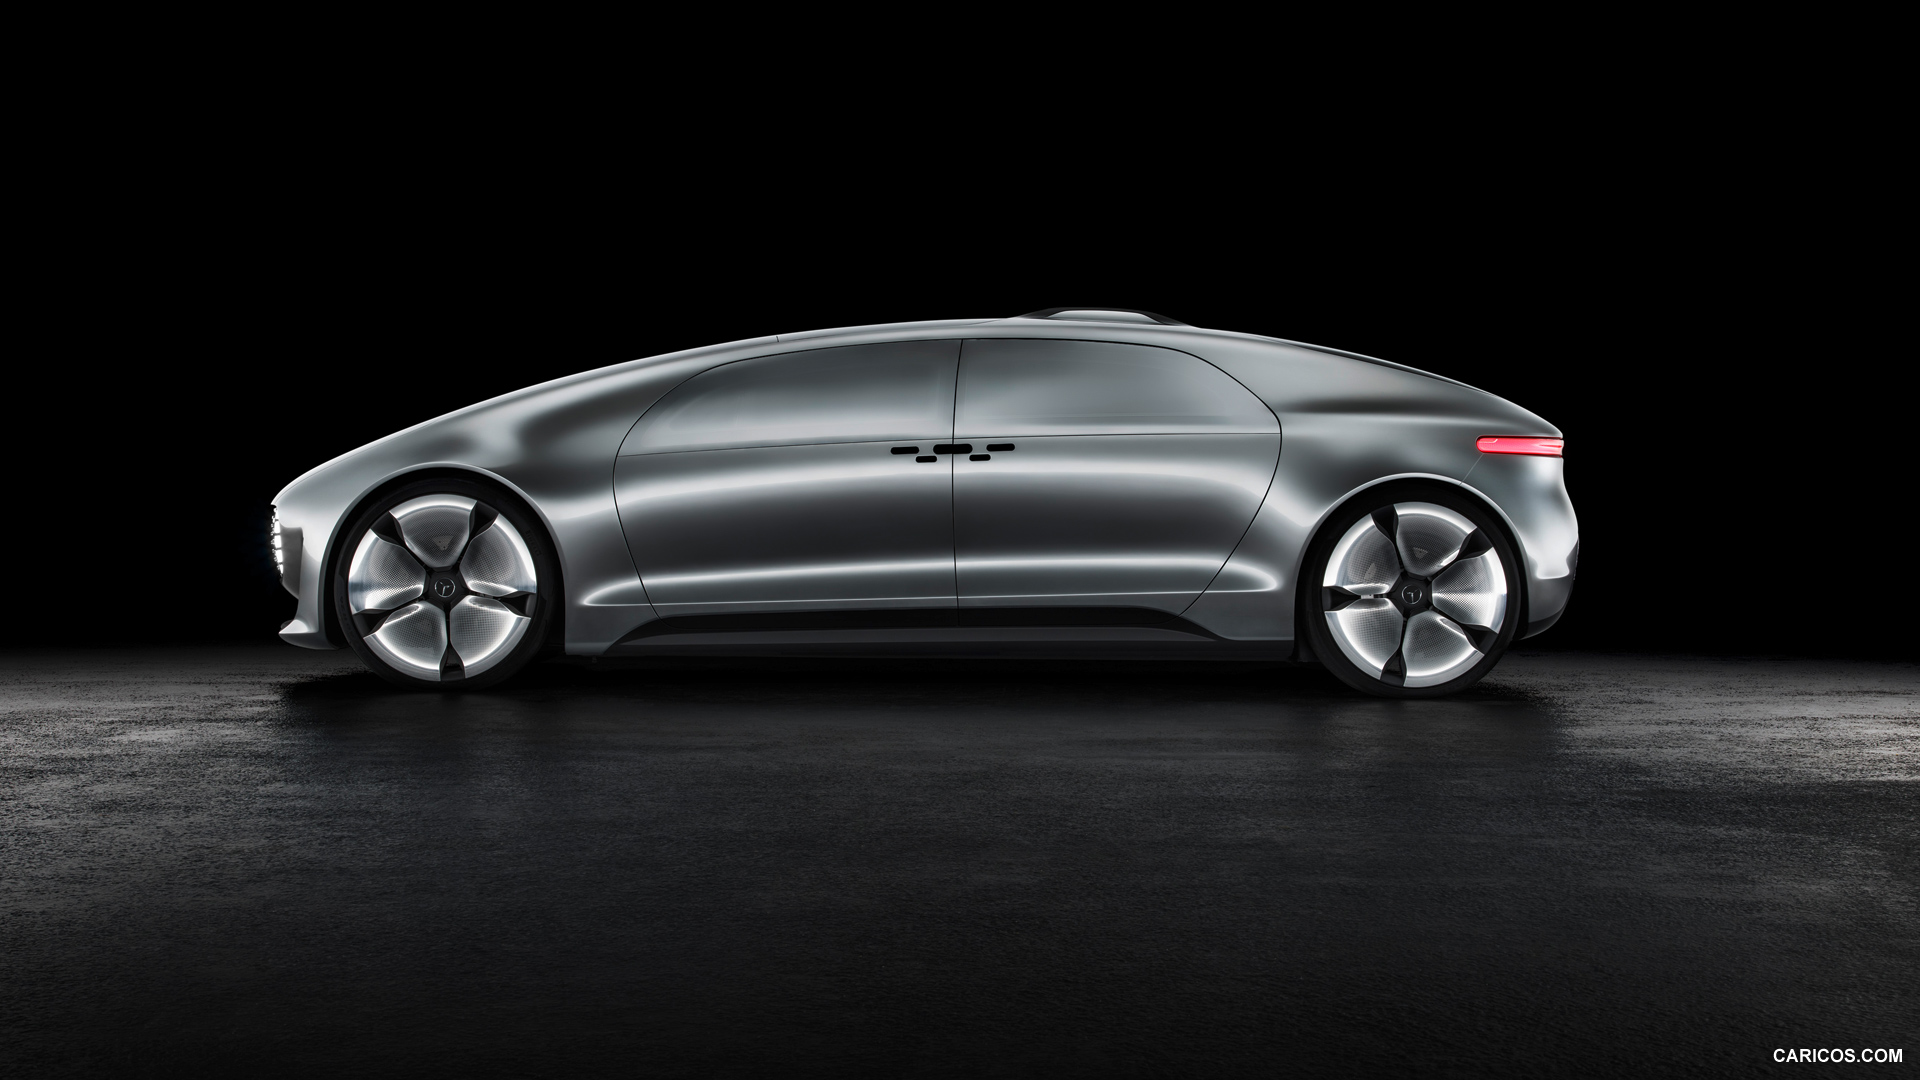 2015 Mercedes-Benz F 015 Luxury in Motion Concept  - Side, #49 of 92